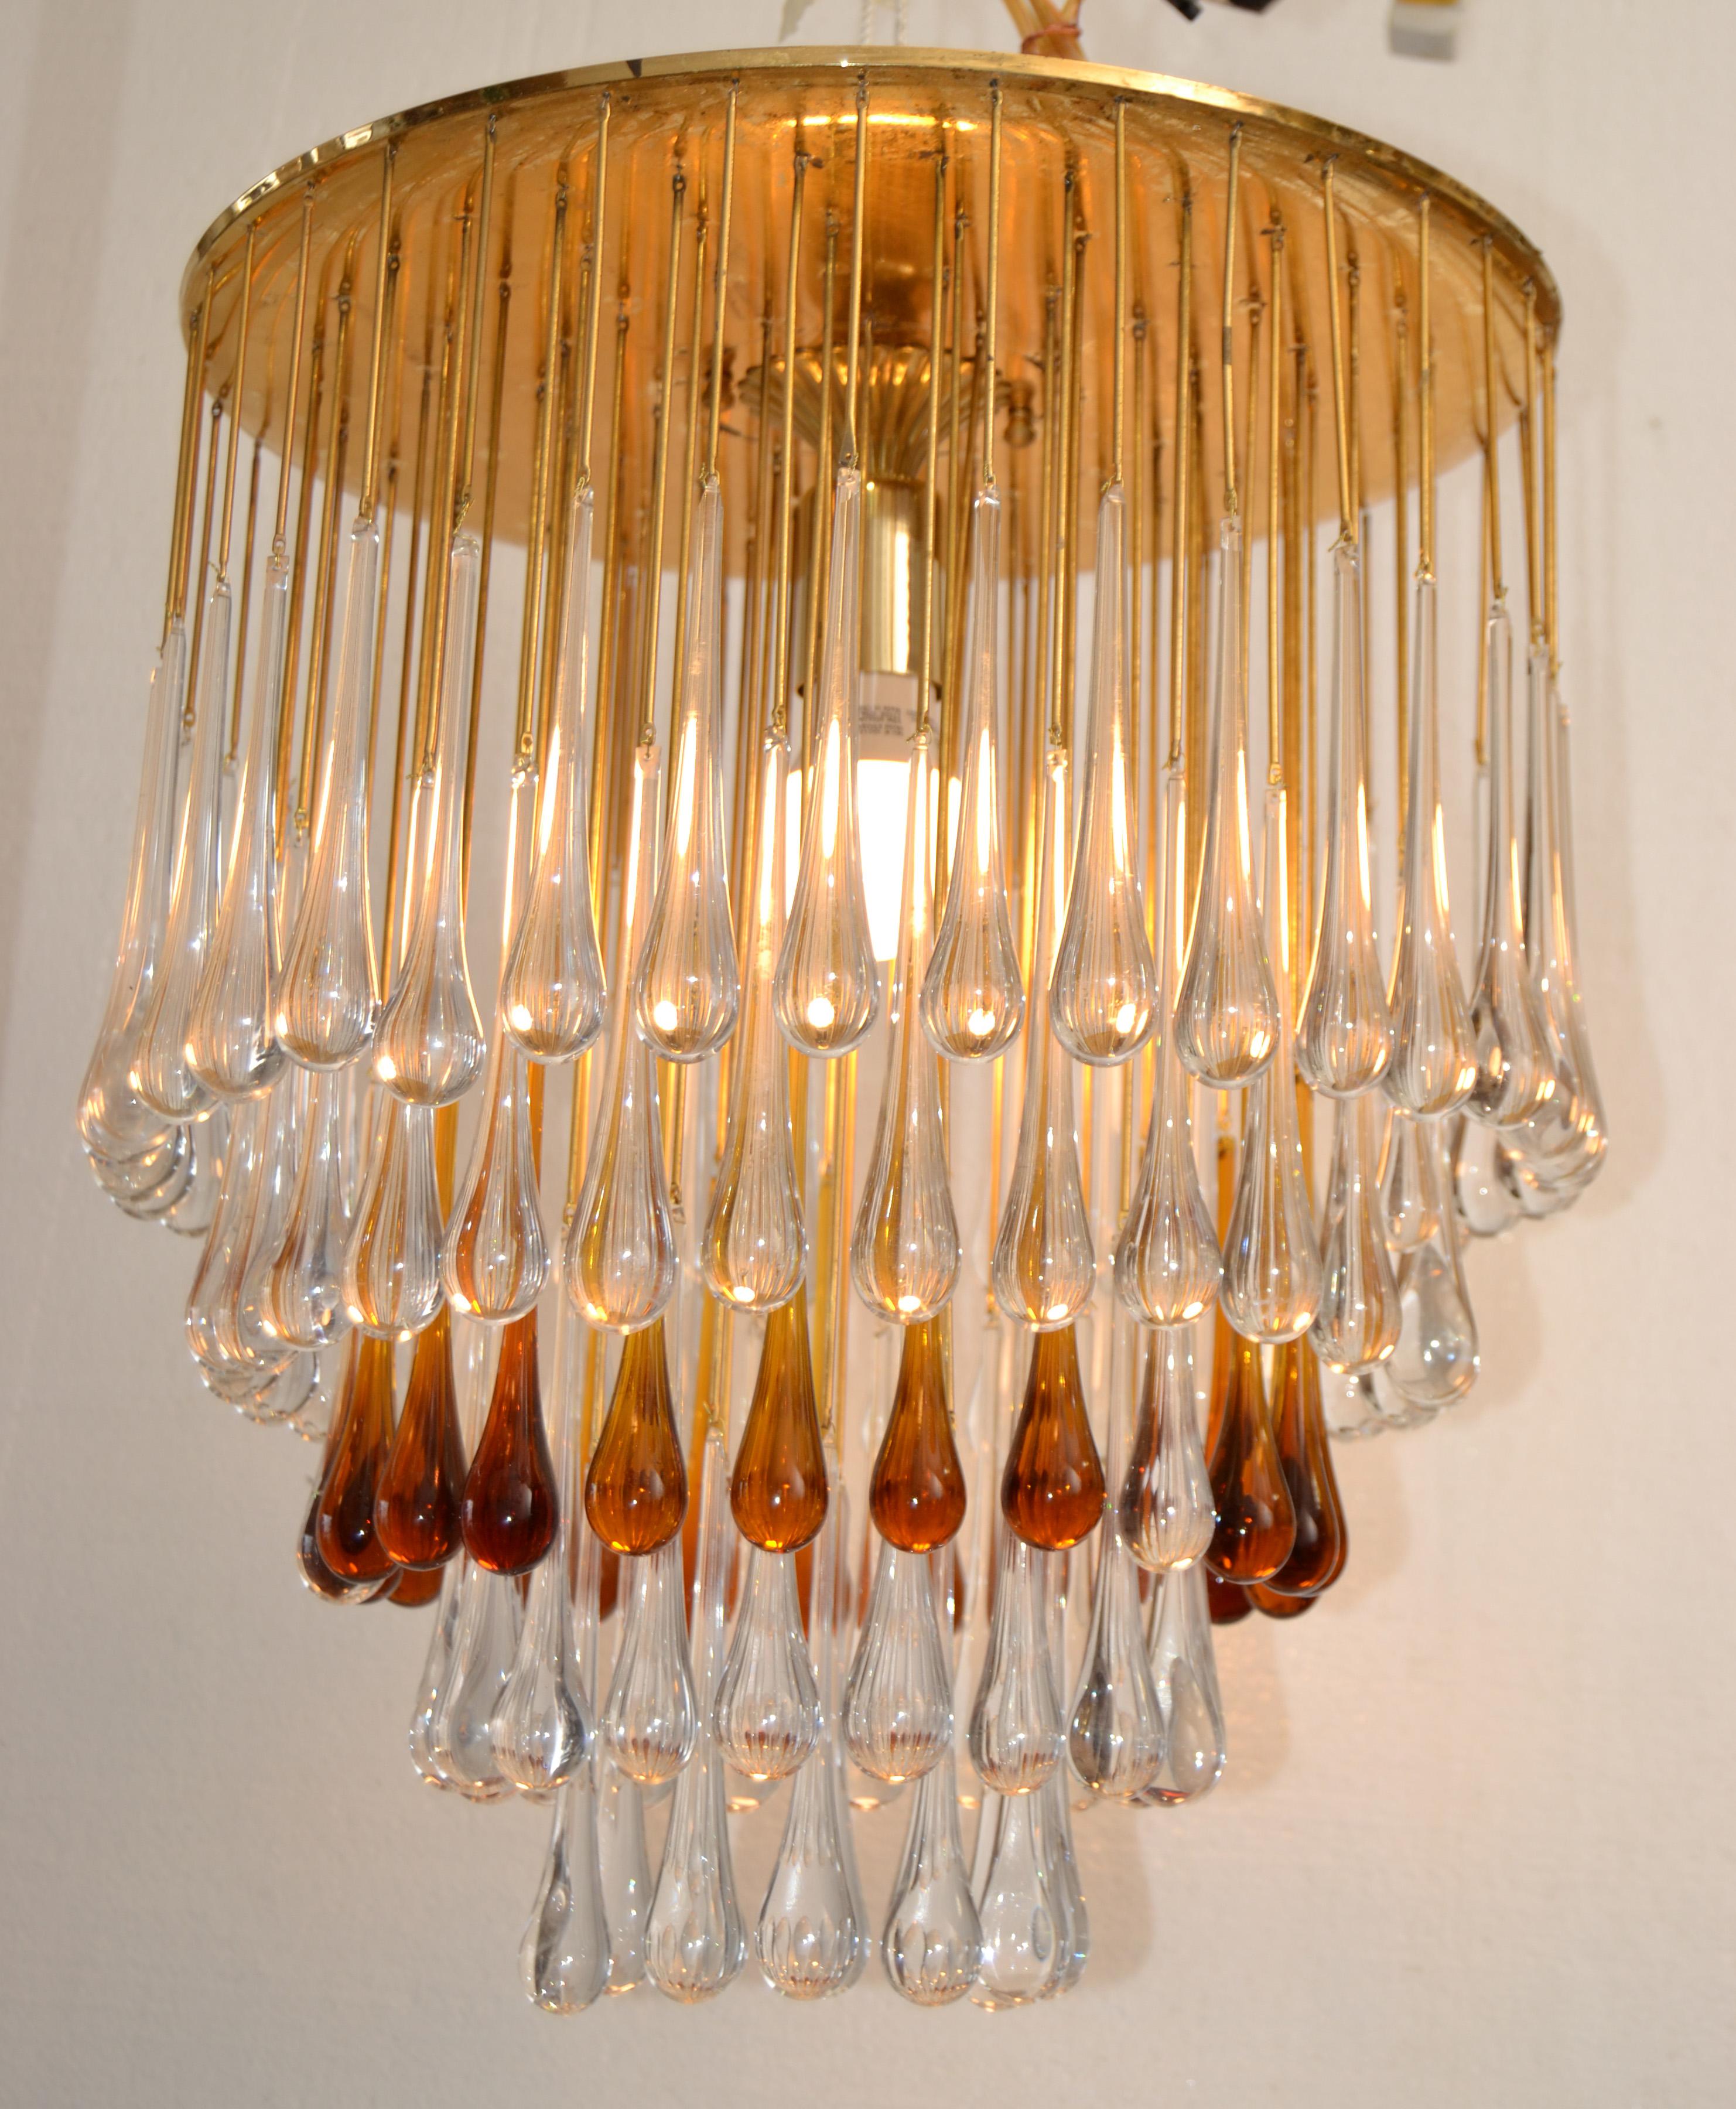 Art Deco French Gold Leaf Crystal Tear Drop Chandelier in Amber and Clear 1940 For Sale 3